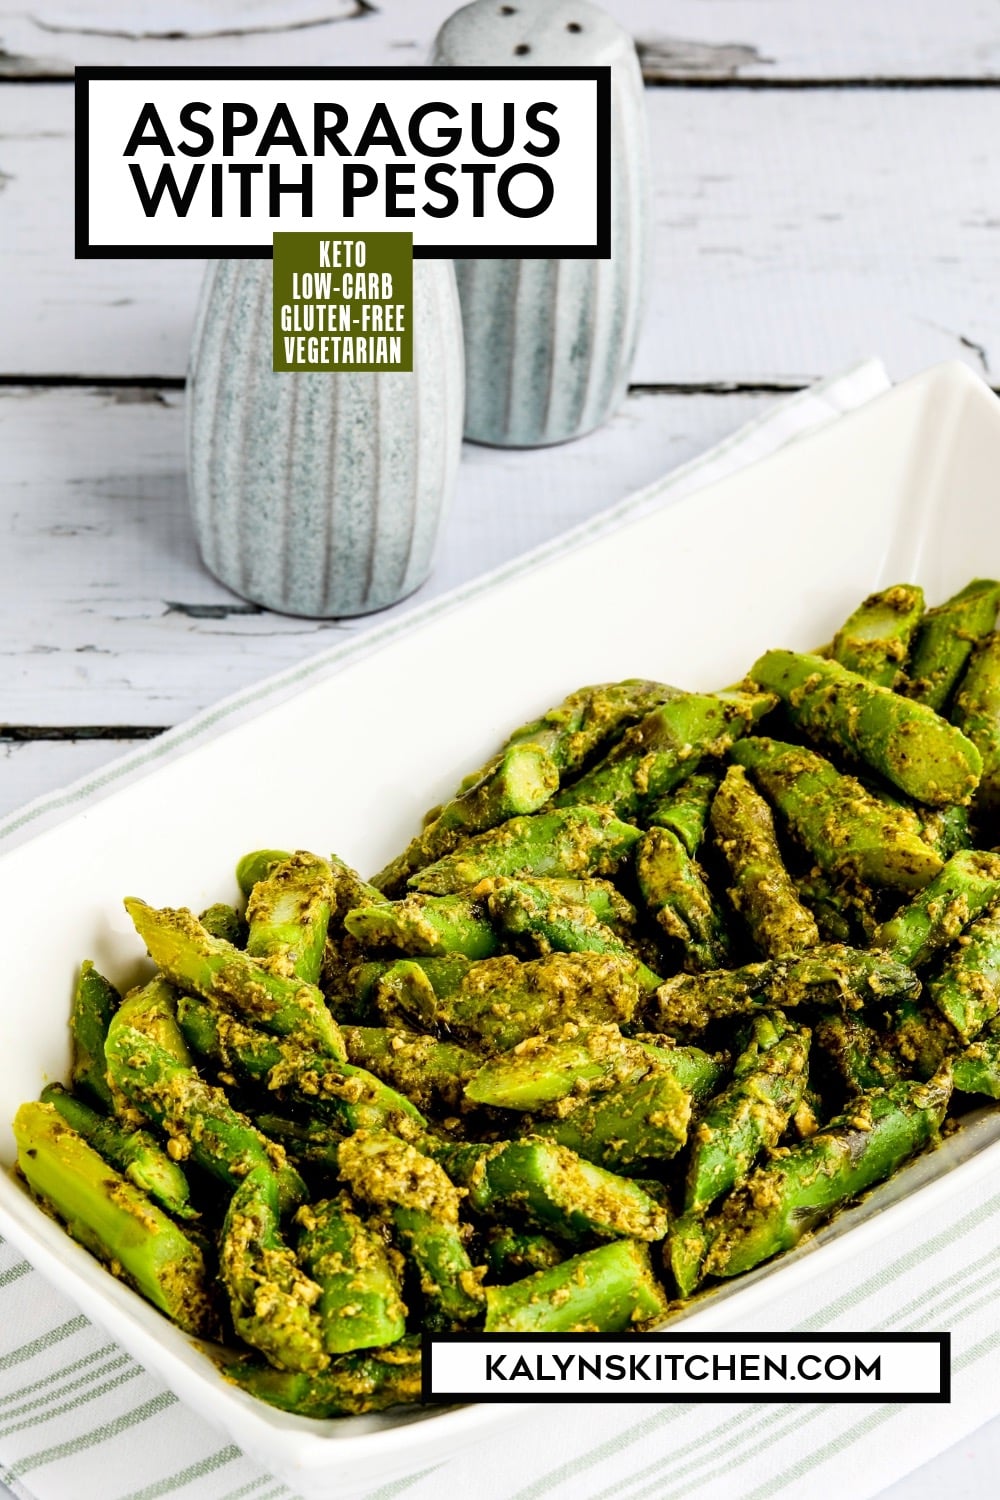 Pinterest image of Asparagus with Pesto